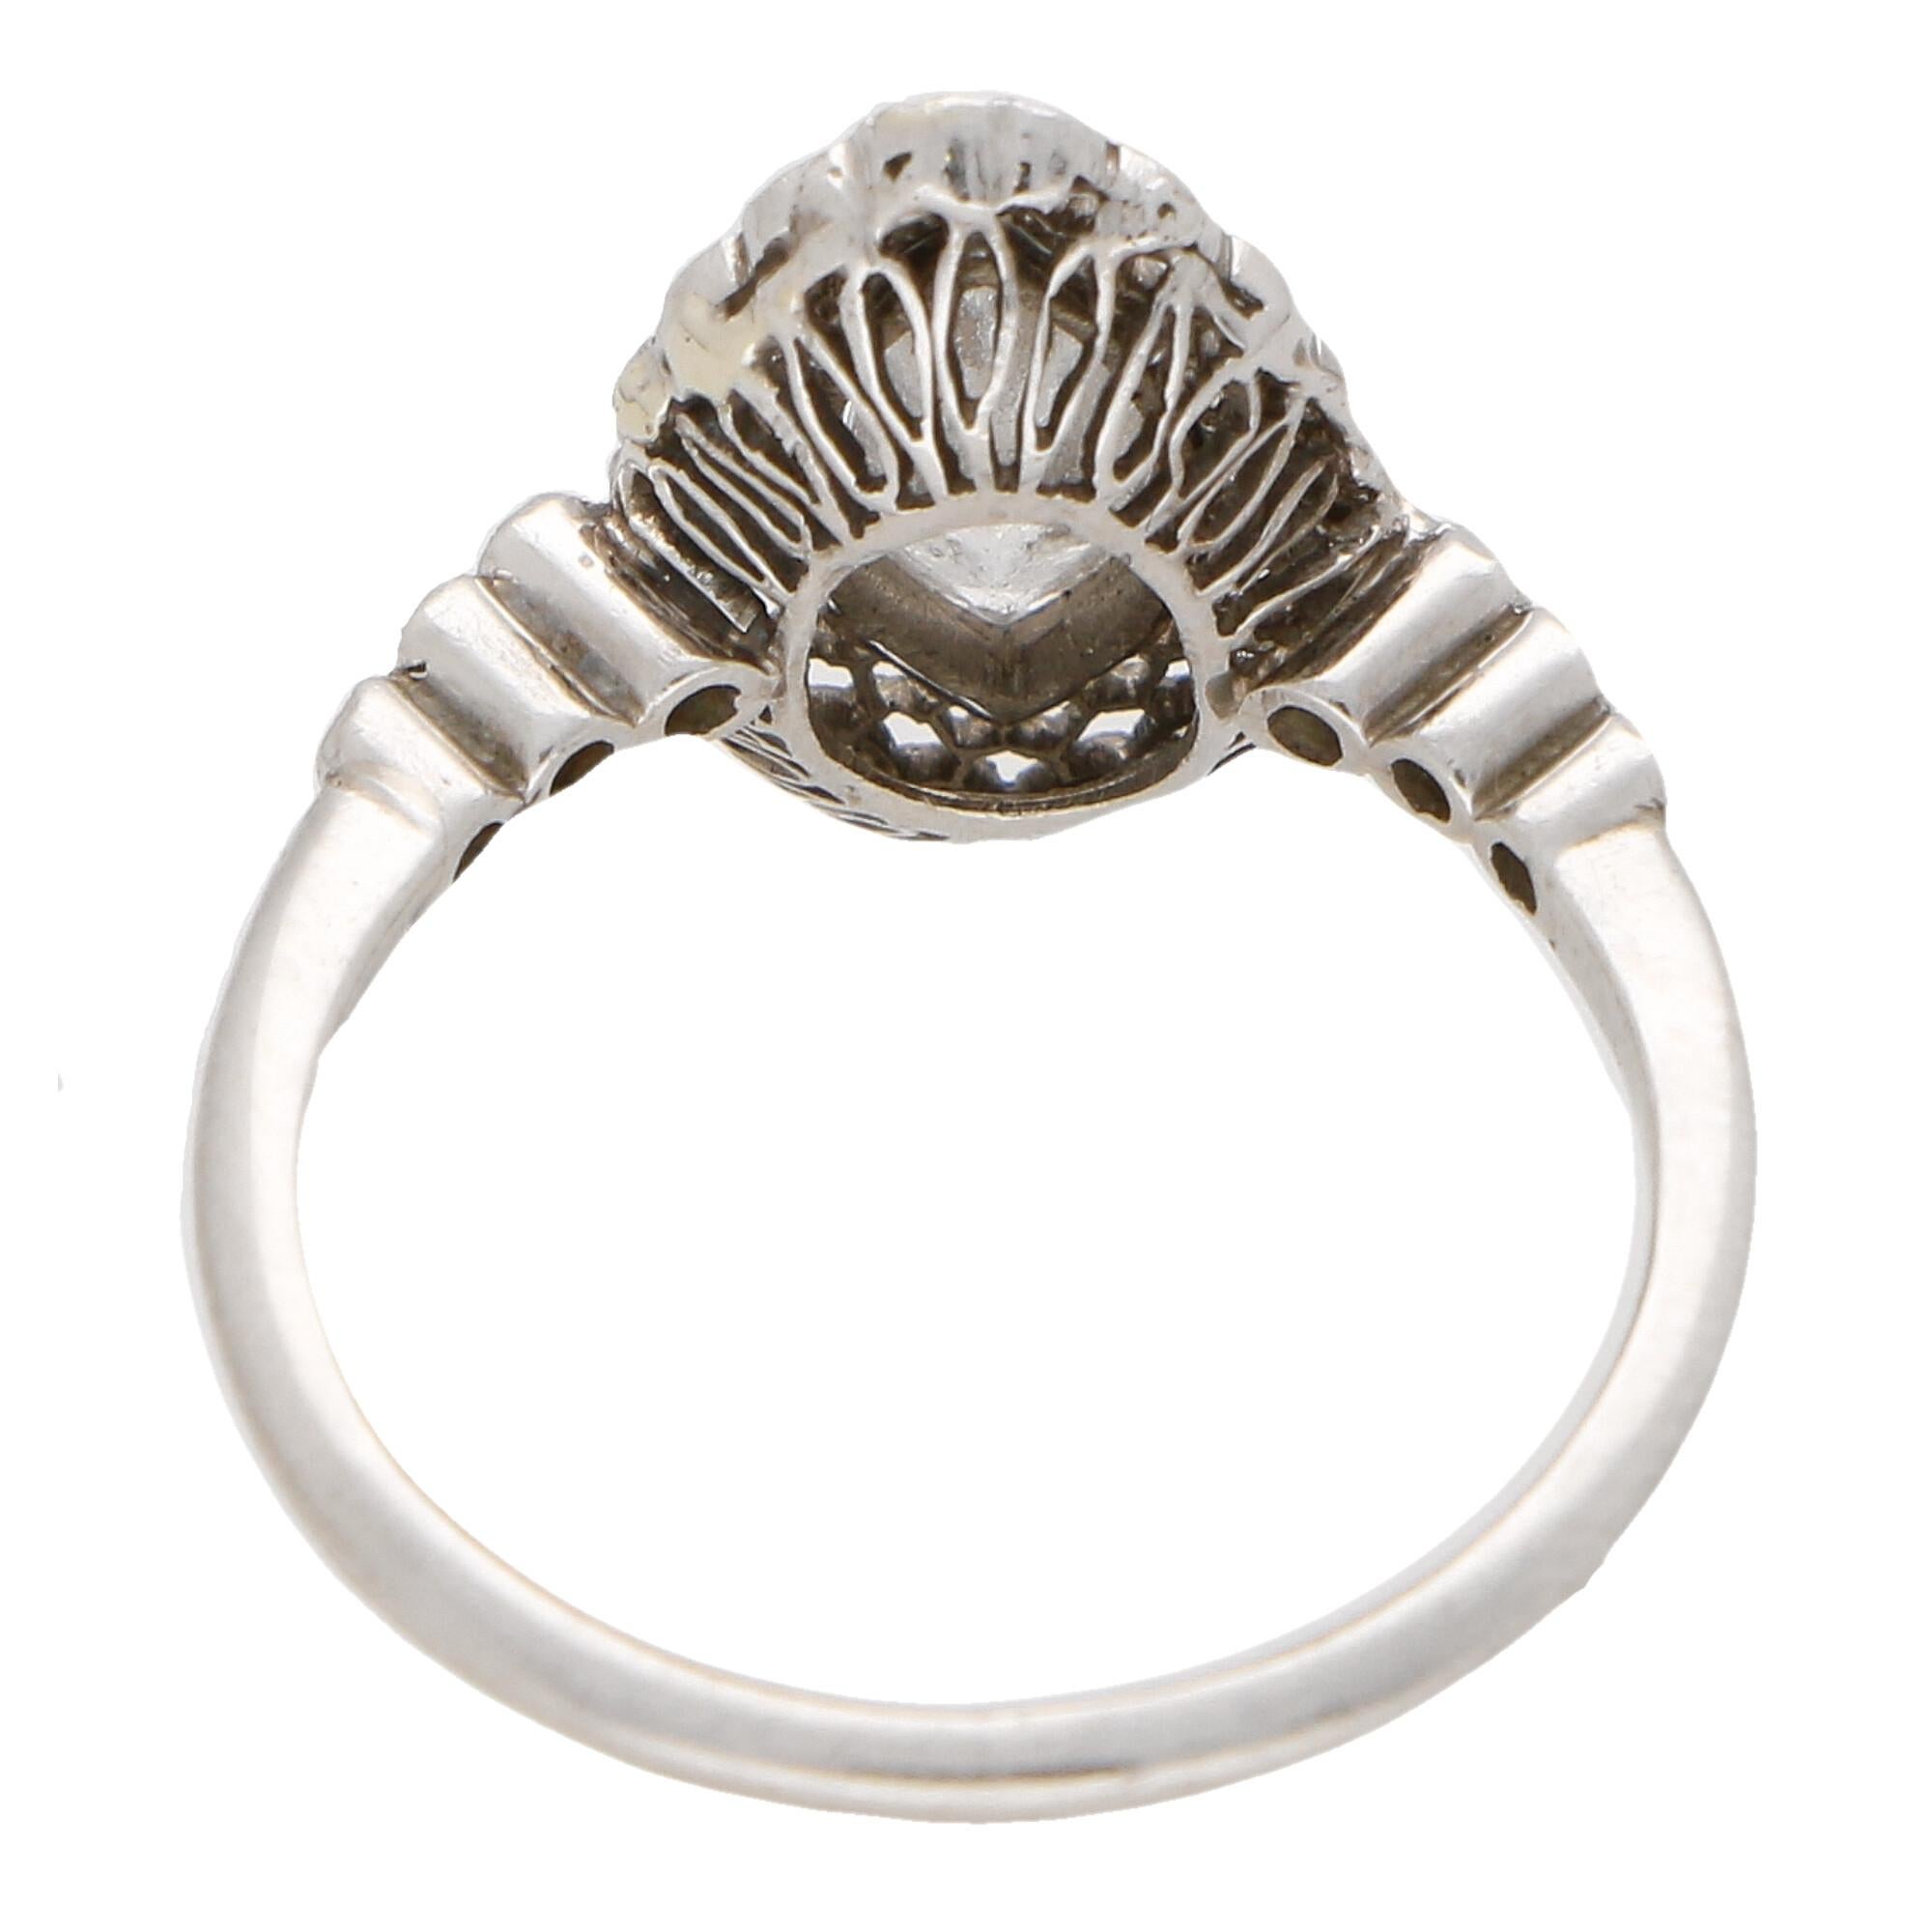 A beautiful Art Deco inspired vintage marquise cut diamond cluster ring set in platinum.

The piece is predominantly set with a sparkly marquise cut diamond which is collet set securely to center. Surrounding this stone is a beautiful display of